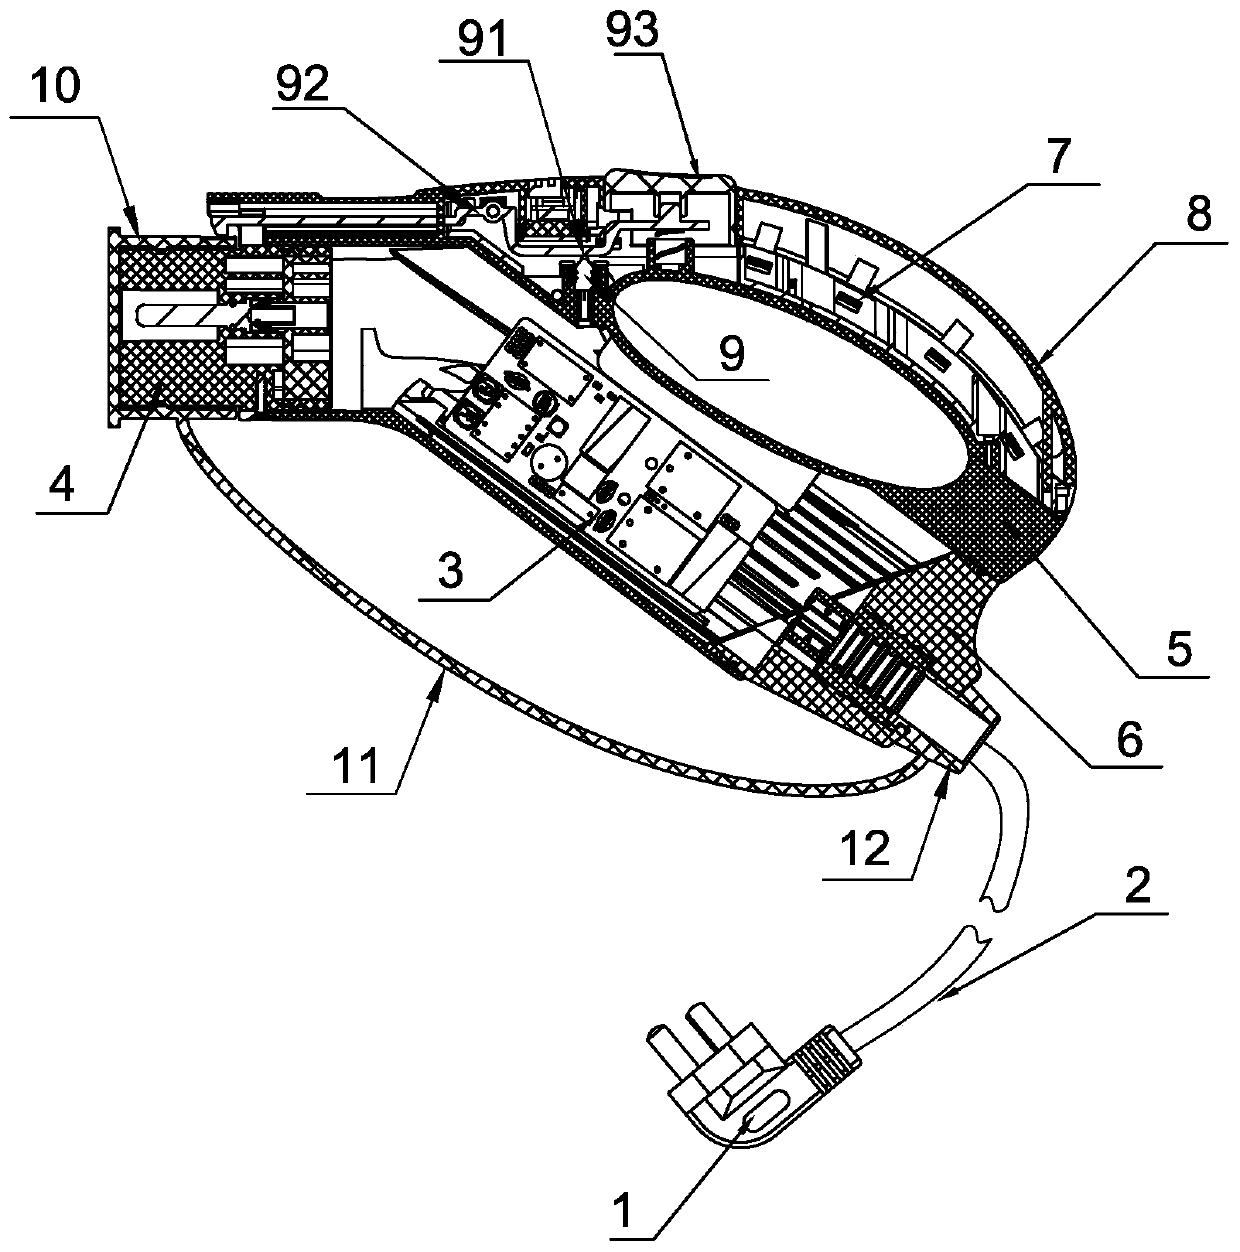 Electric vehicle alternating current charging gun with integrated control circuit hidden in gun body